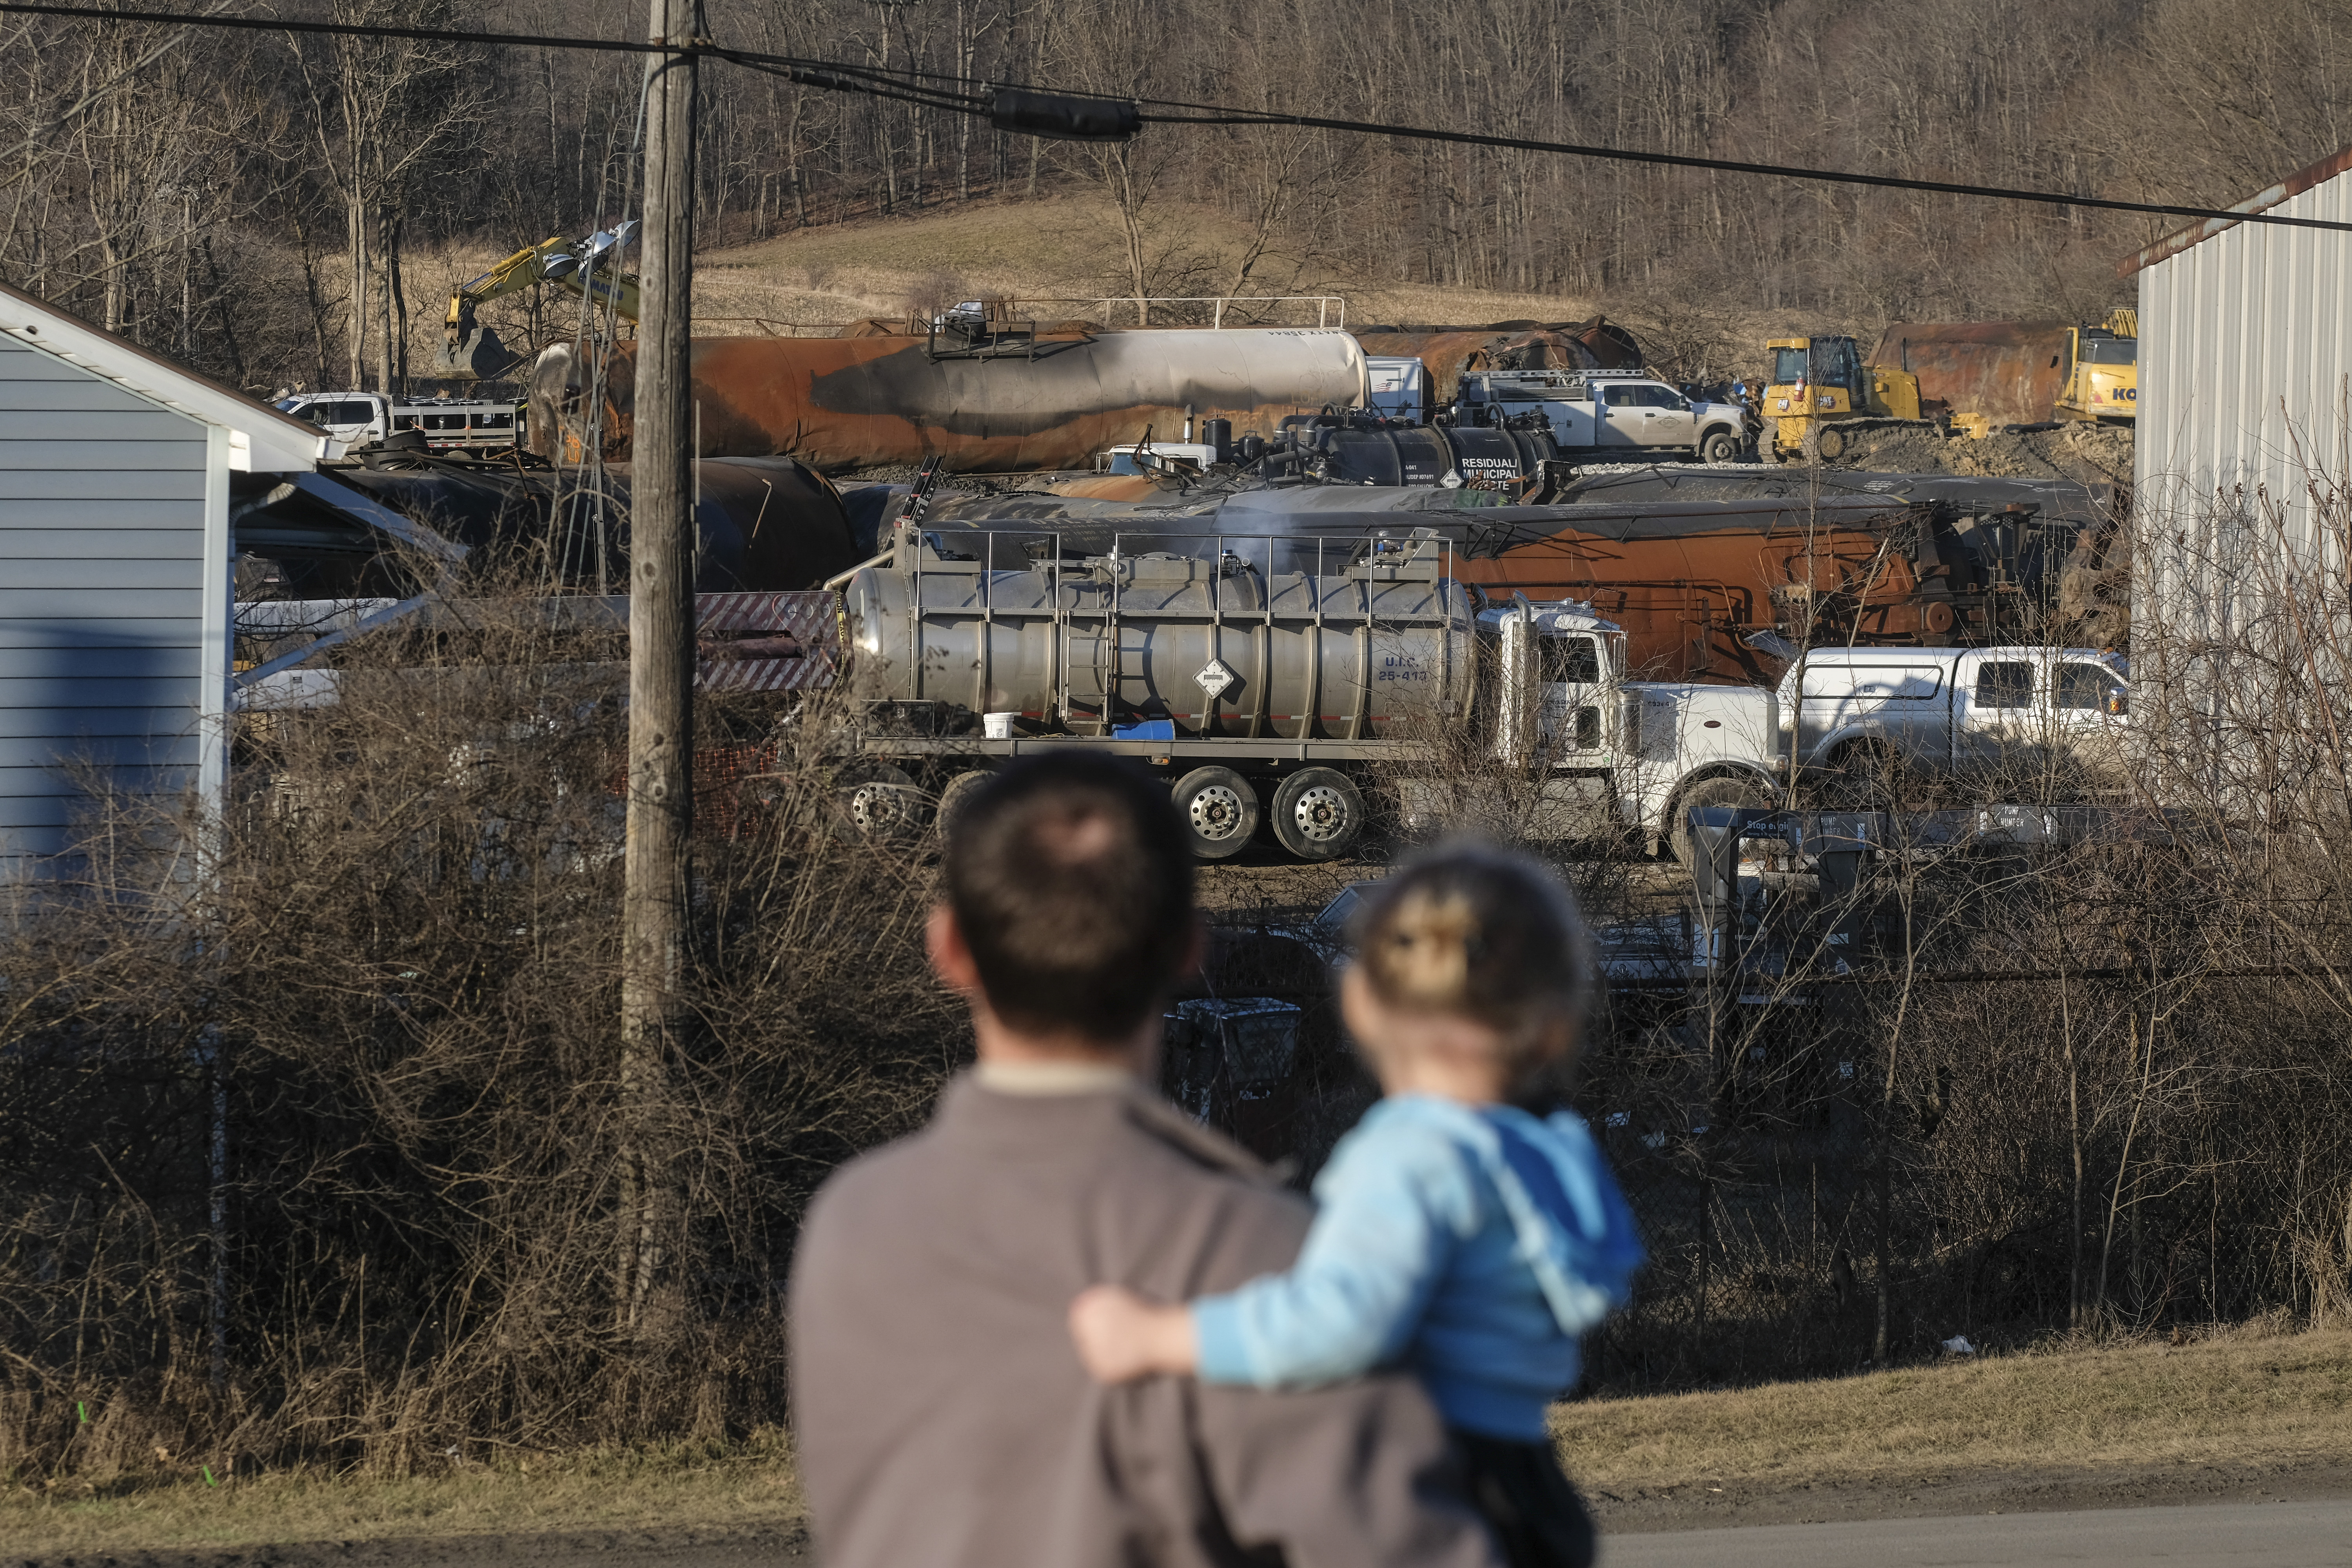 A family from Pennsylvania inspects the wreckage of the Norfolk Southern train derailment in East Palestine, Ohio, on February 19, 2023.